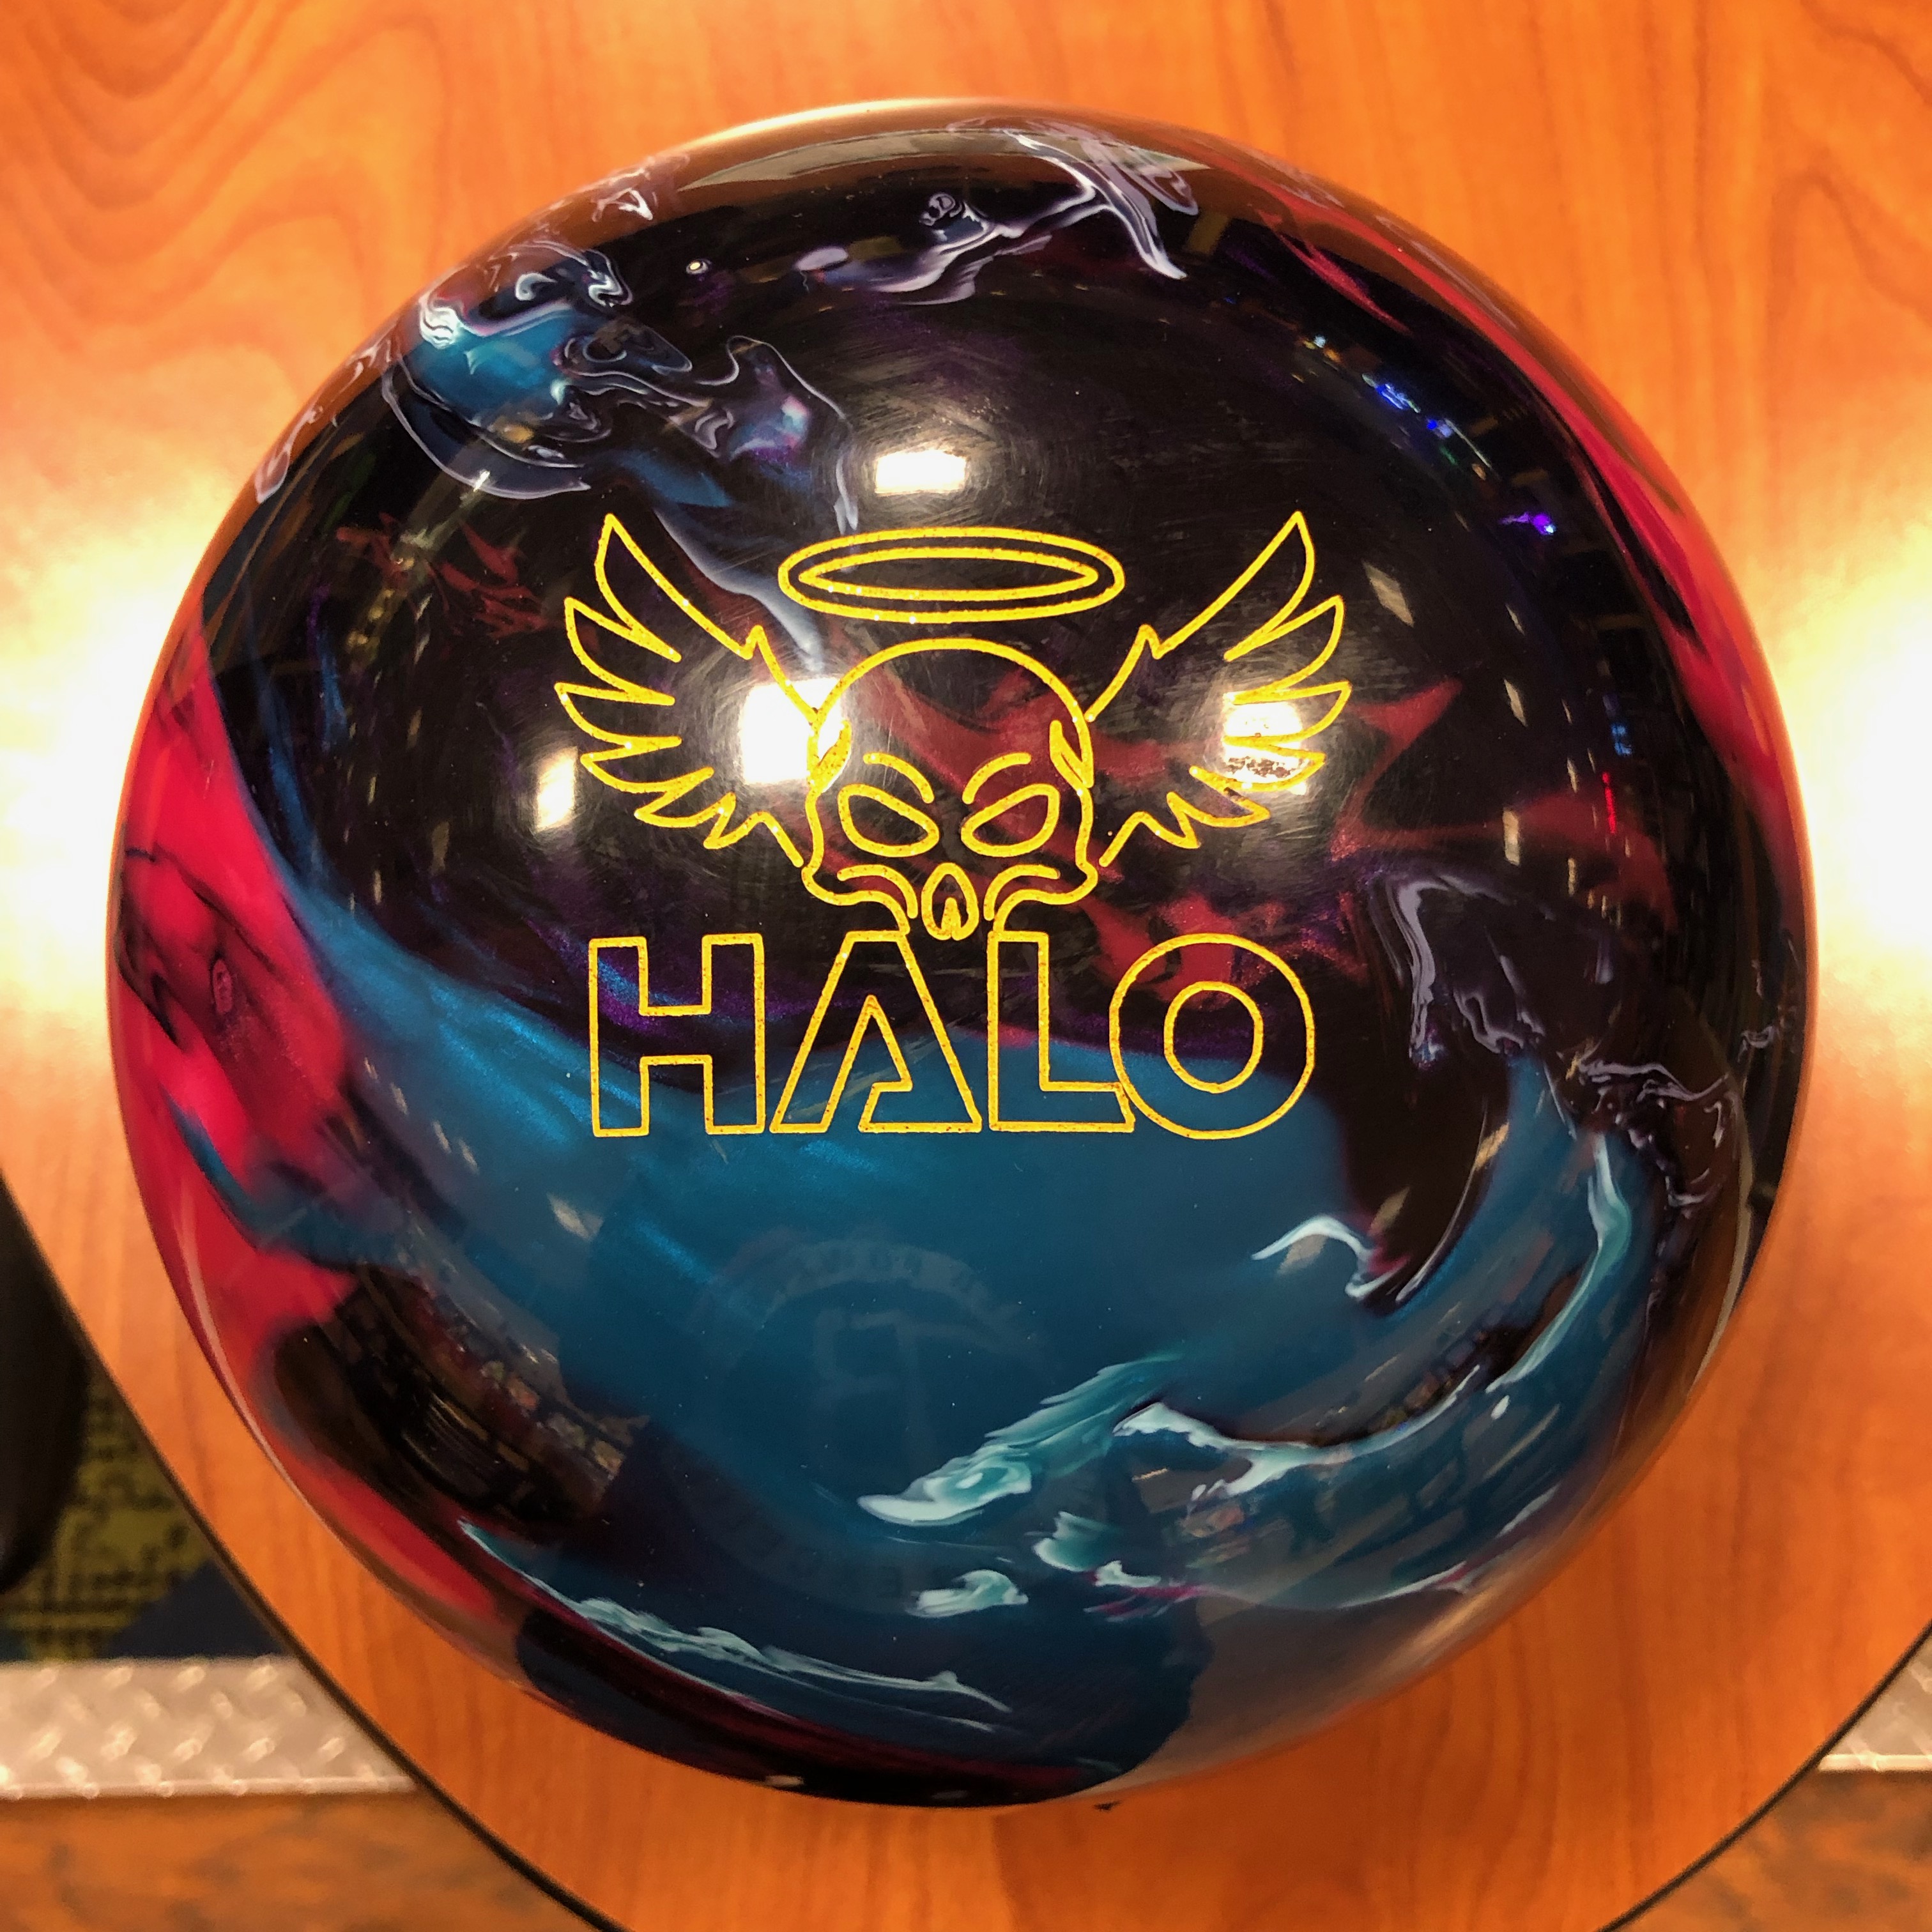 Roto Grip Halo Pearl 14 lb bowling ball with 3.5-4 pin